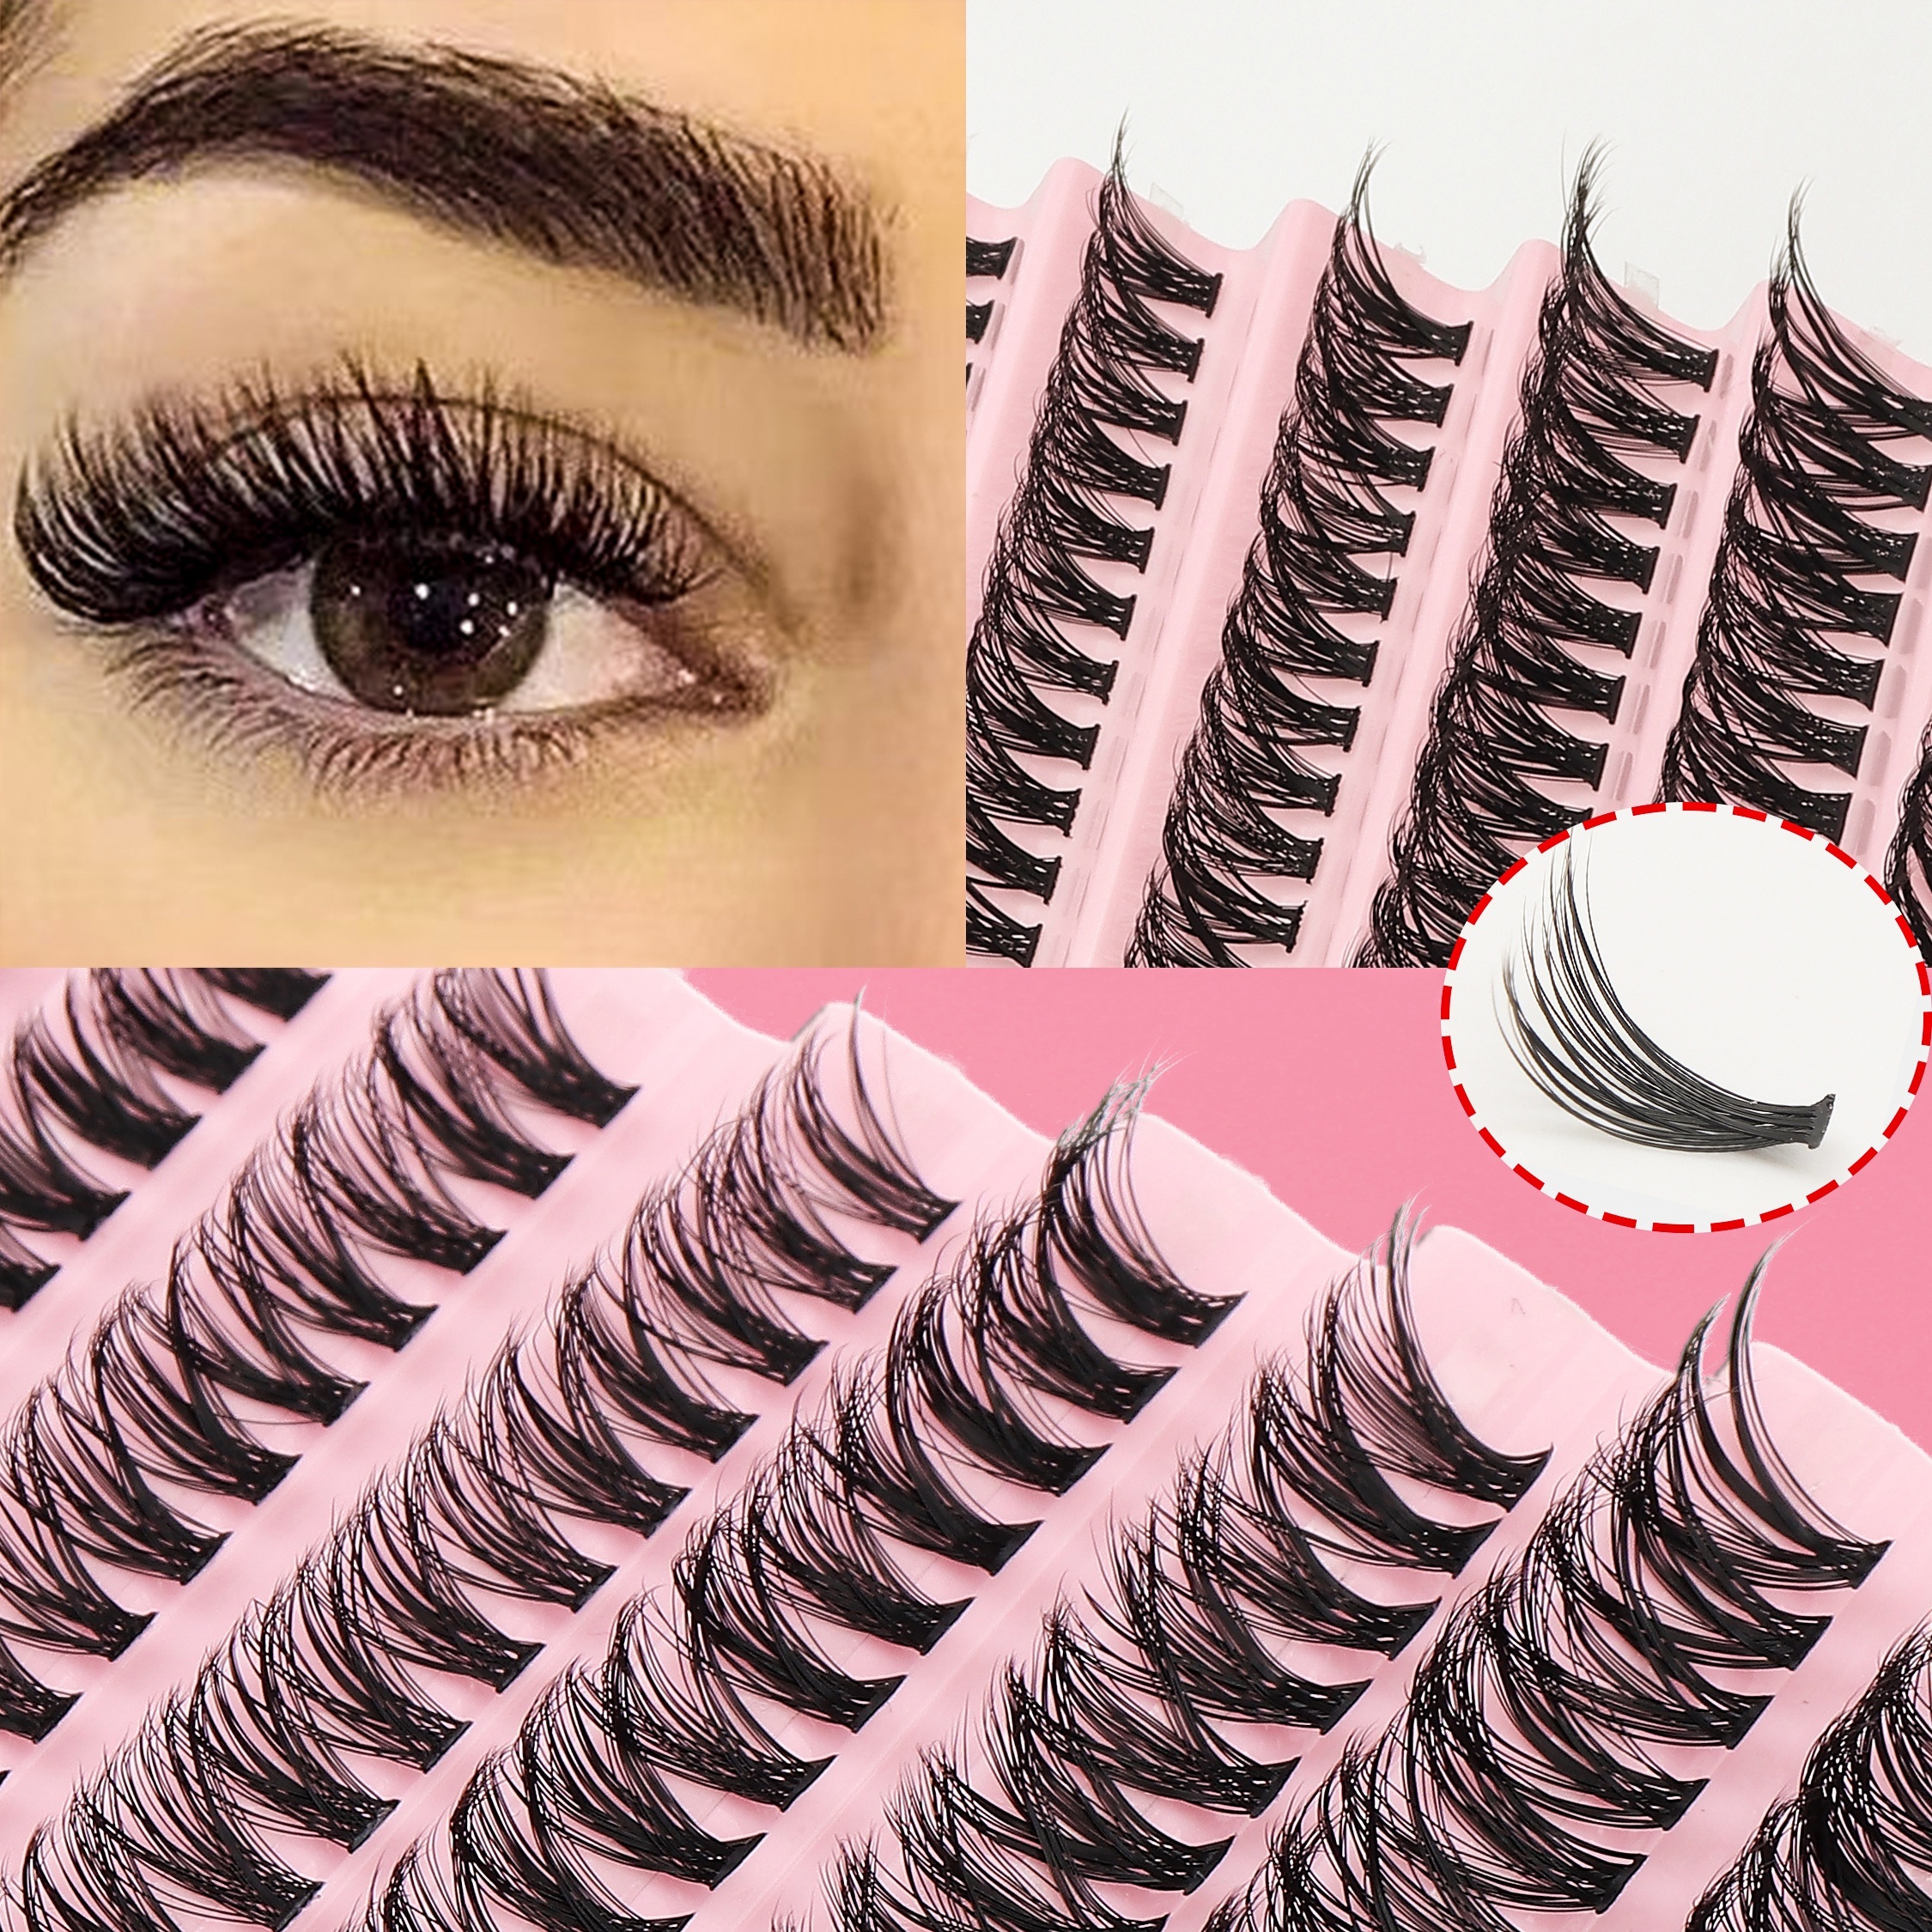 

200 Clusters Of Eyelashes, D 10-16mm Mixed Lengths Diy Eyelash Extension, Fluffy Segmented Grafted False Eyelashes Natural Cluster Eyelash Extension, Suitable For Beginners And Daily Use, Reusable